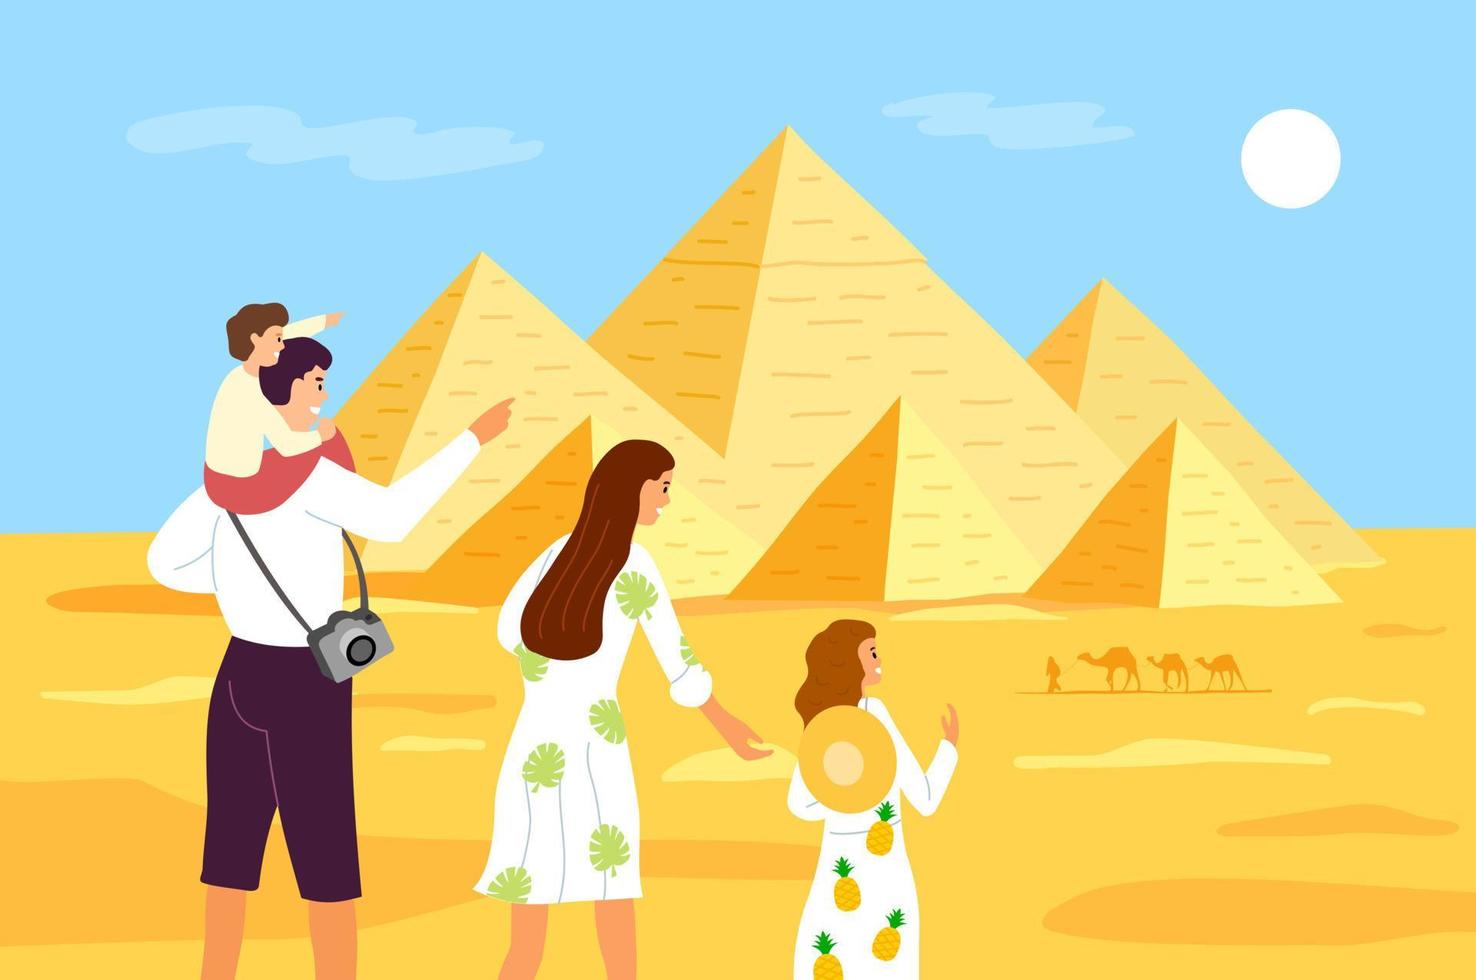 Pyramids of Egypt. A family of tourists looks at the Egyptian pyramids. Pyramid of Cheops in Cairo, Giza. Egyptian stone structures. Vector illustration